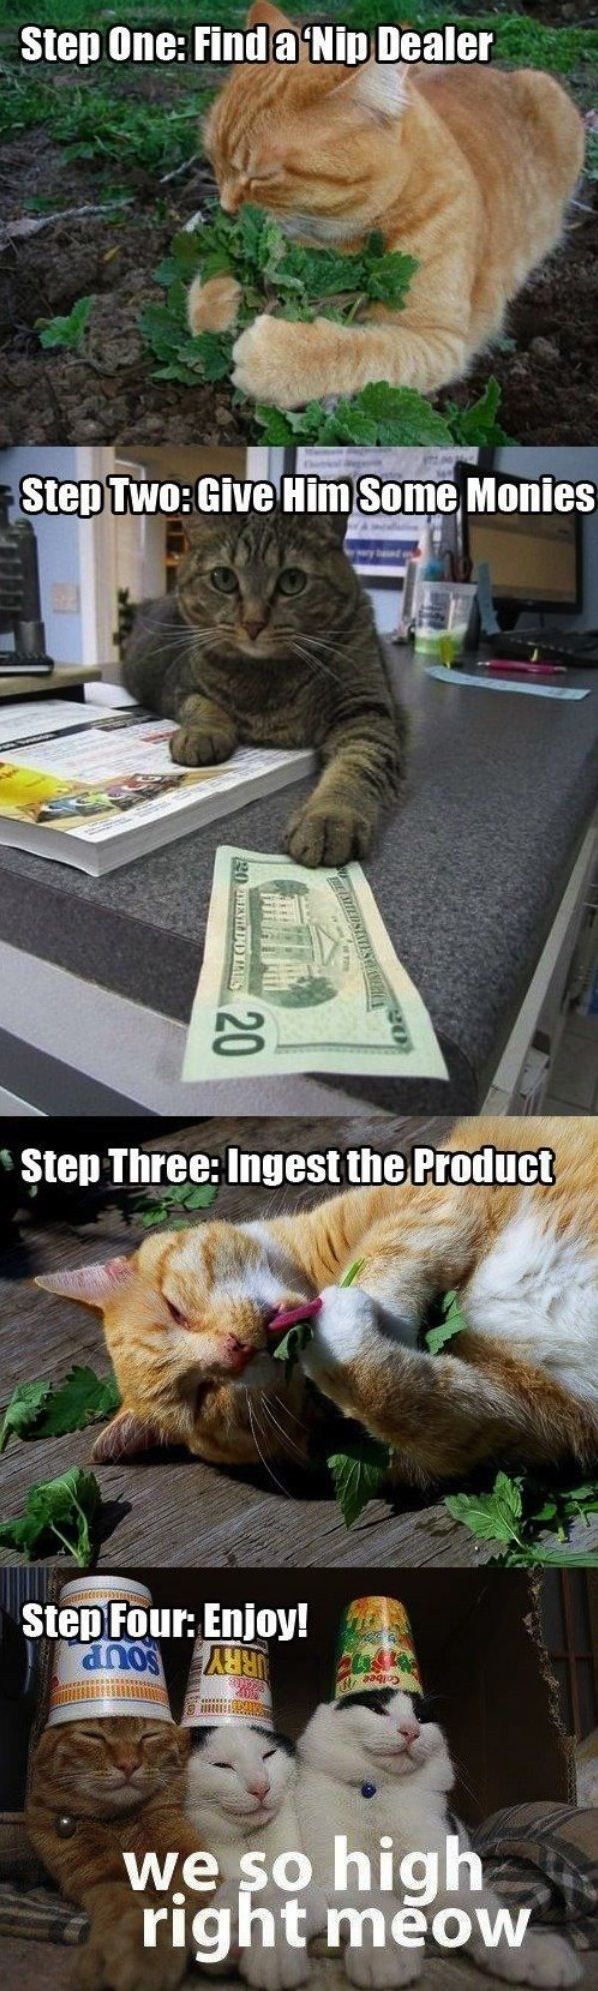 Step One: Find a 'Nip Dealer
 Step Two: Give Him Some Monies
 Step Three: Ingest the Product
 Step Four: Enjoy!
 we so high right meow